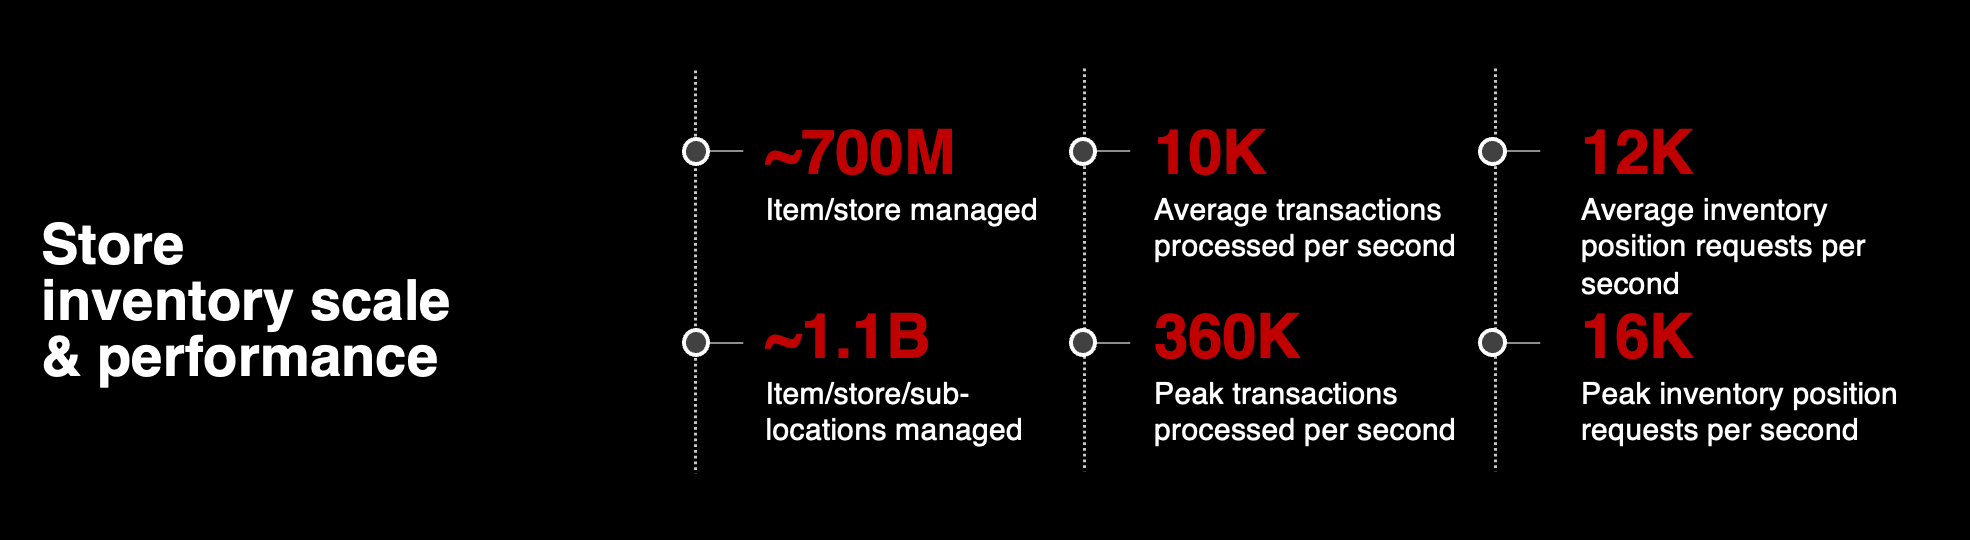 Graphic detailing store inventory scale and performance, listing details including over 700m items per store managed, 10k average transactions processed per second, 12k average inventory position requests per second